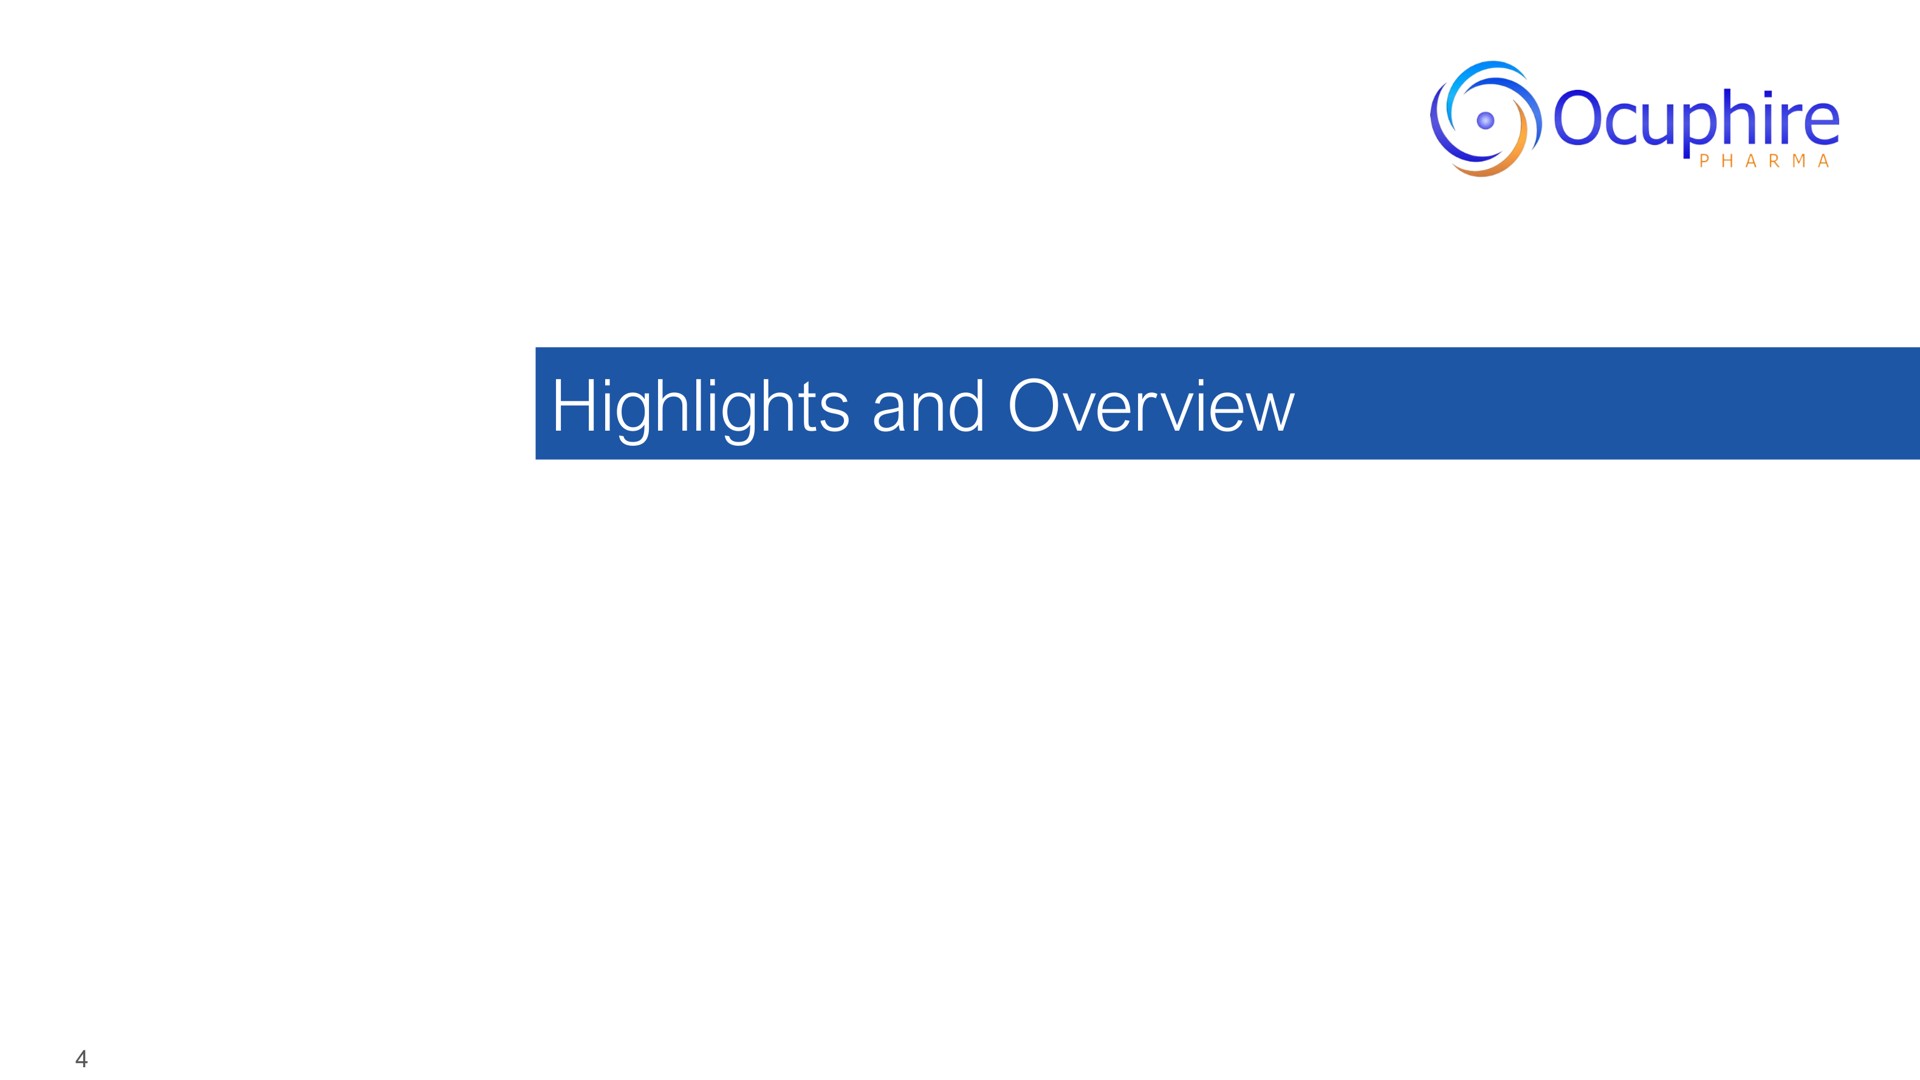 highlights and overview | Ocuphire Pharma